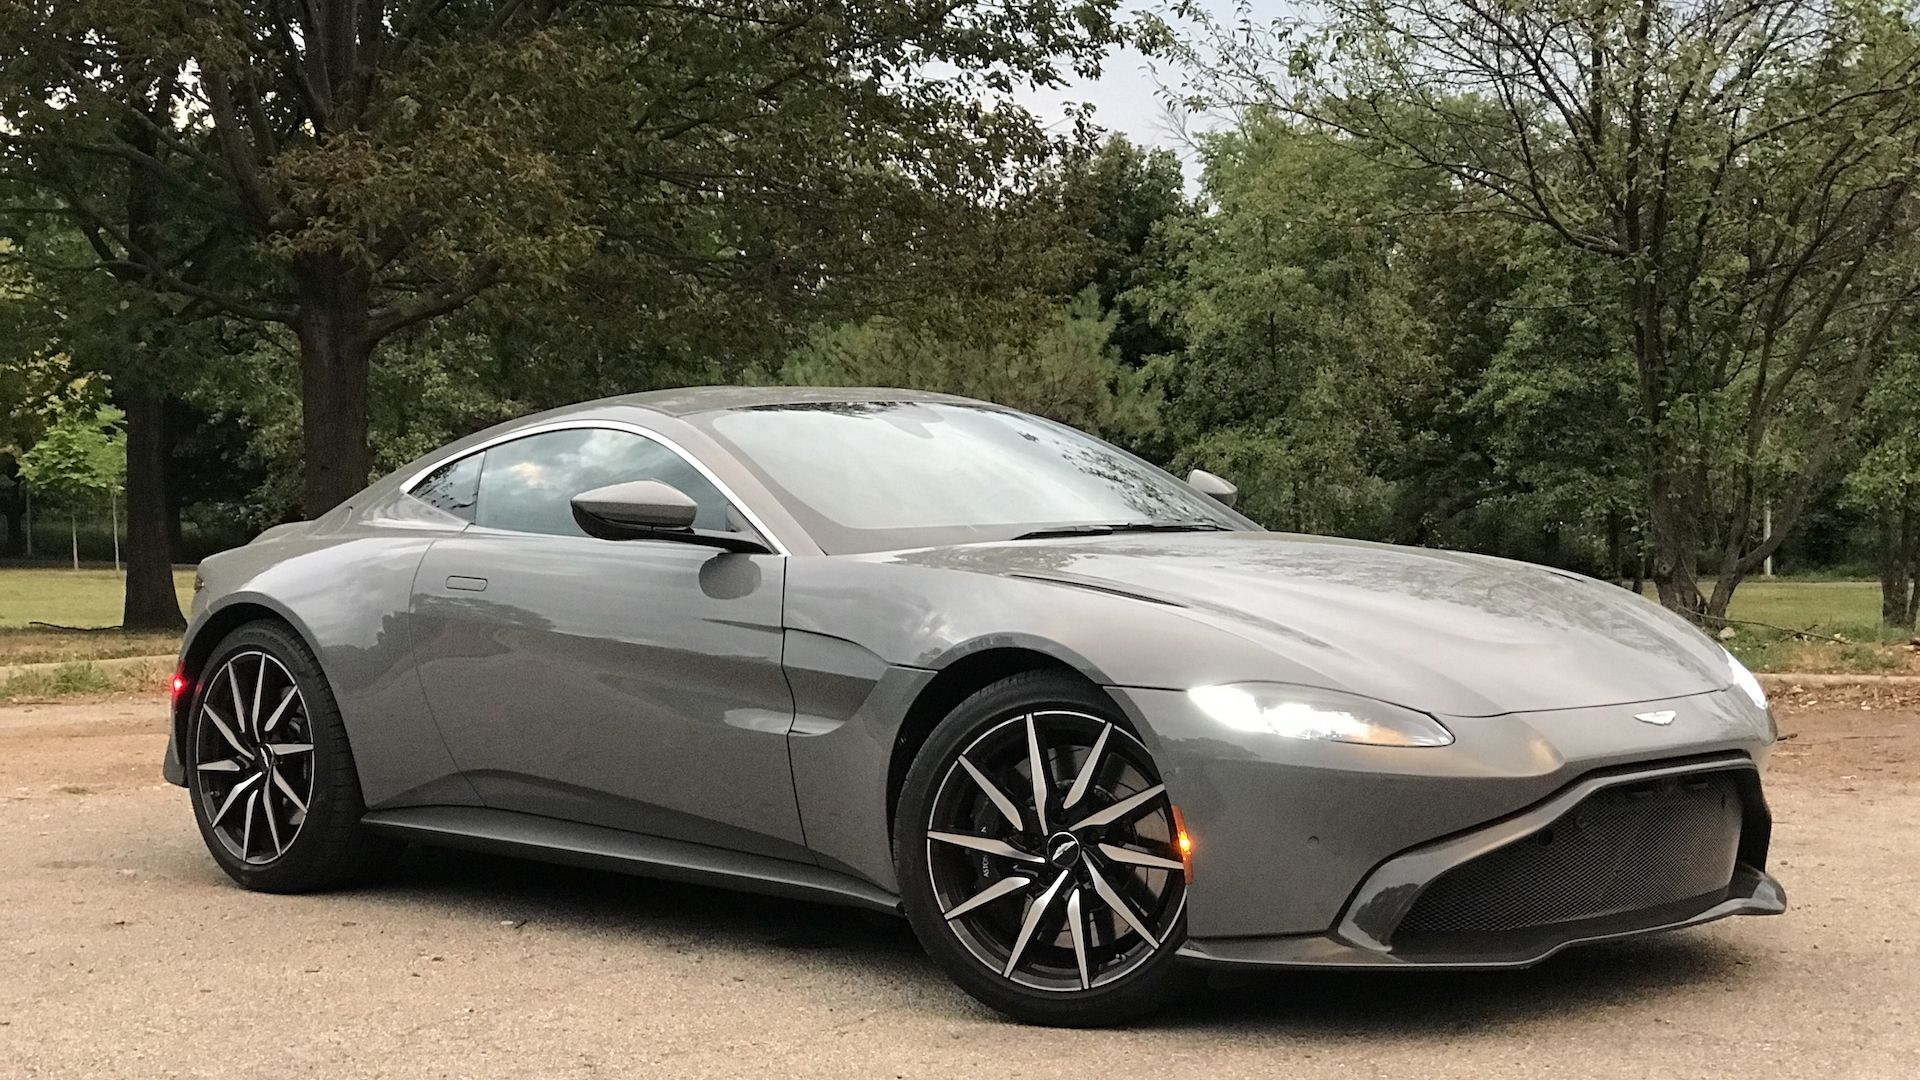 Aston Martin Vantage V12 Announced! To Be Released In 2022